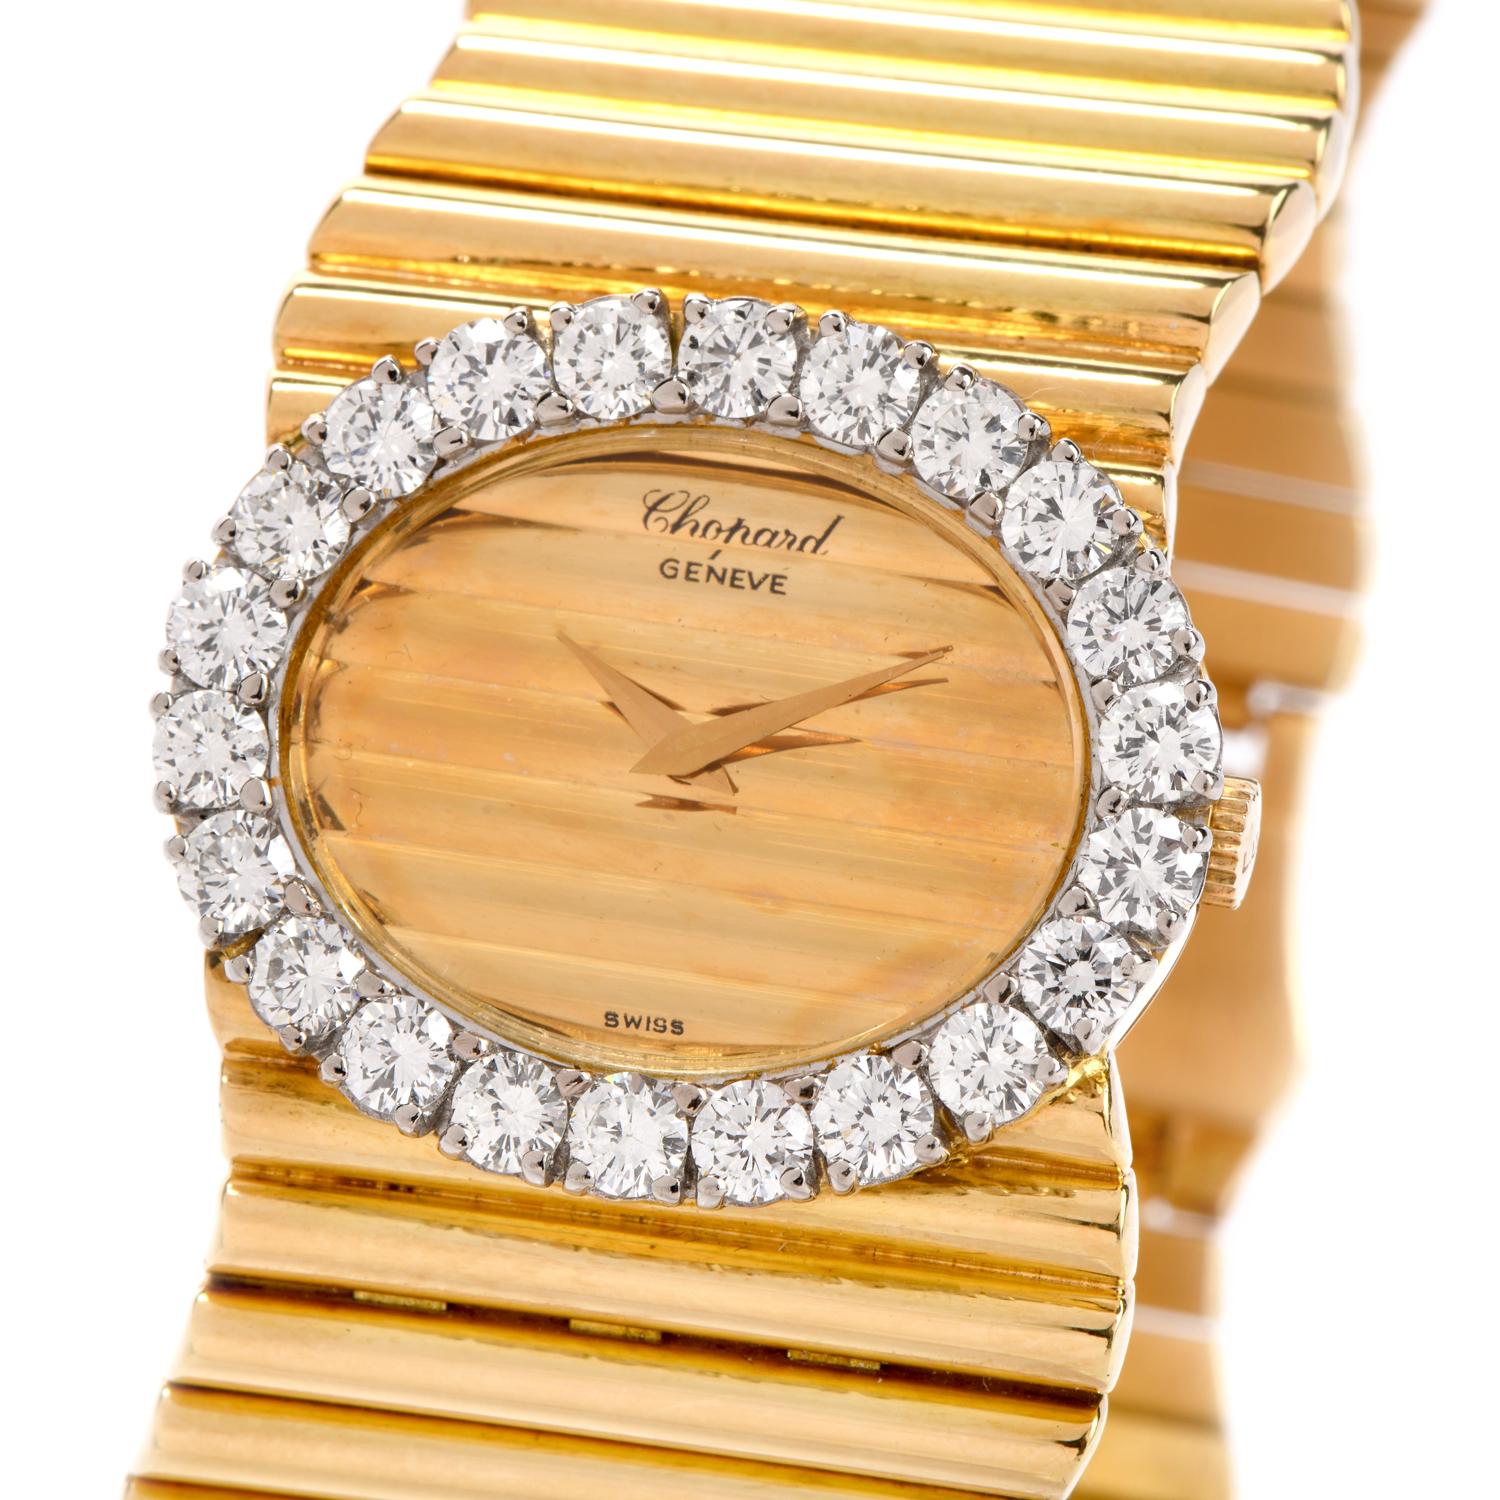 This exquisitely made Vintage 1960’s ladies Chopard diamond cocktail watch Is a must have.
This Boutique quality Chopard watch is made of luxurious 18k high polish yellow gold and
adorned with 26 diamonds around its bezel,
totaling an estimated